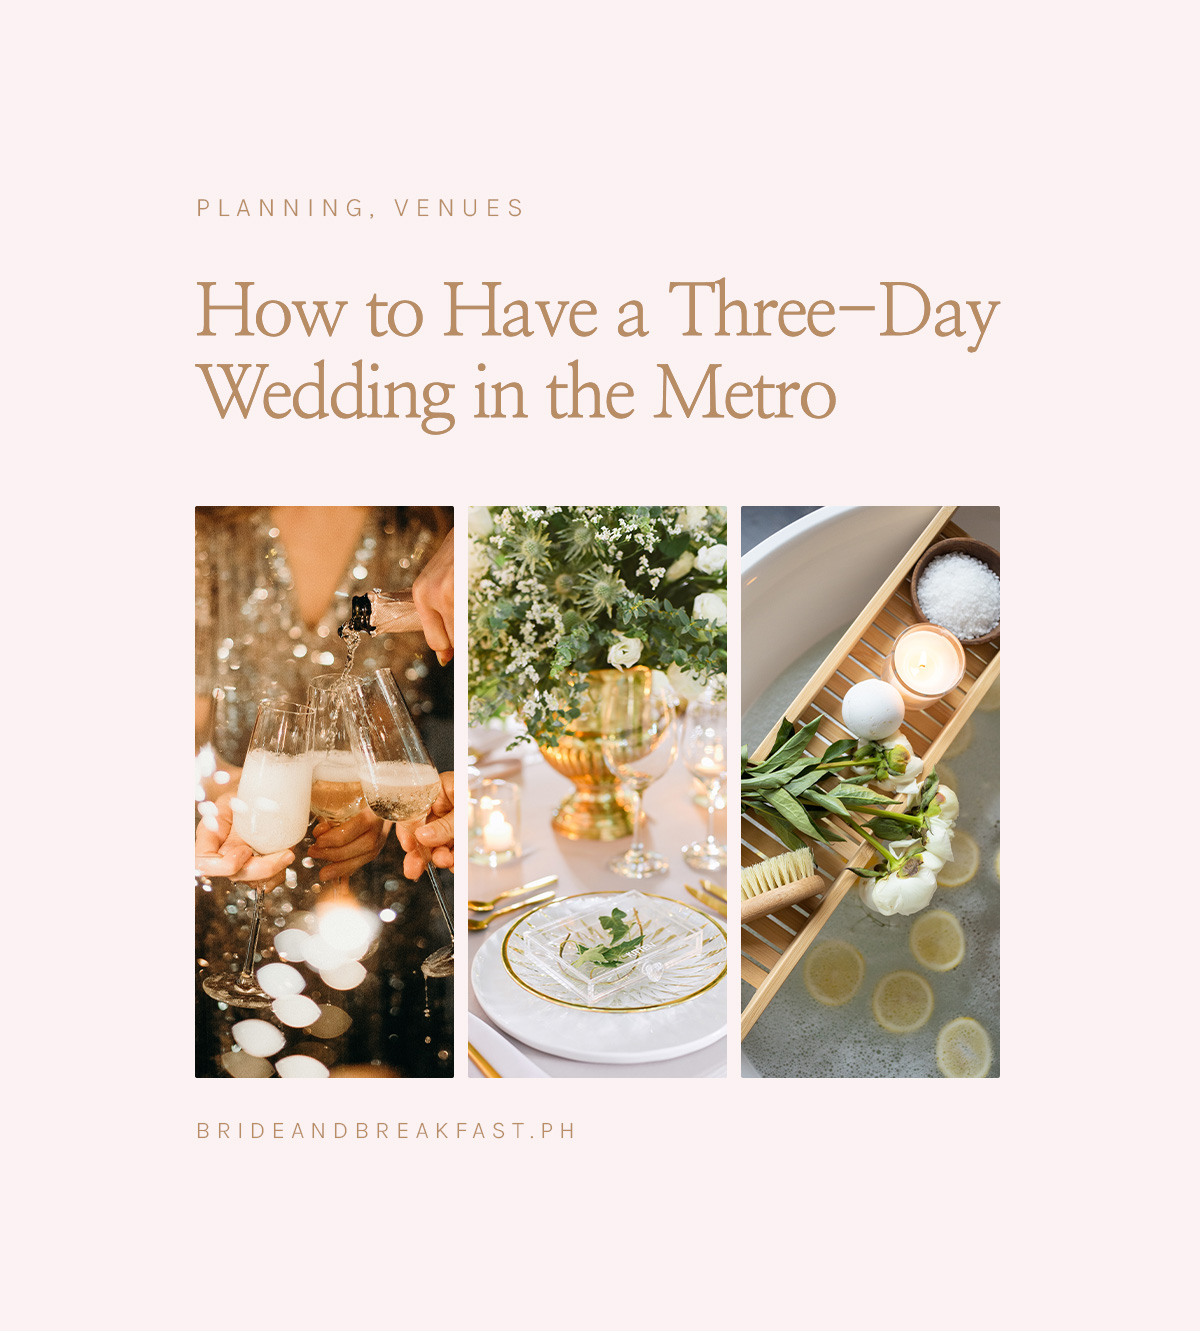 How to Have a Three-Day Wedding in the Metro